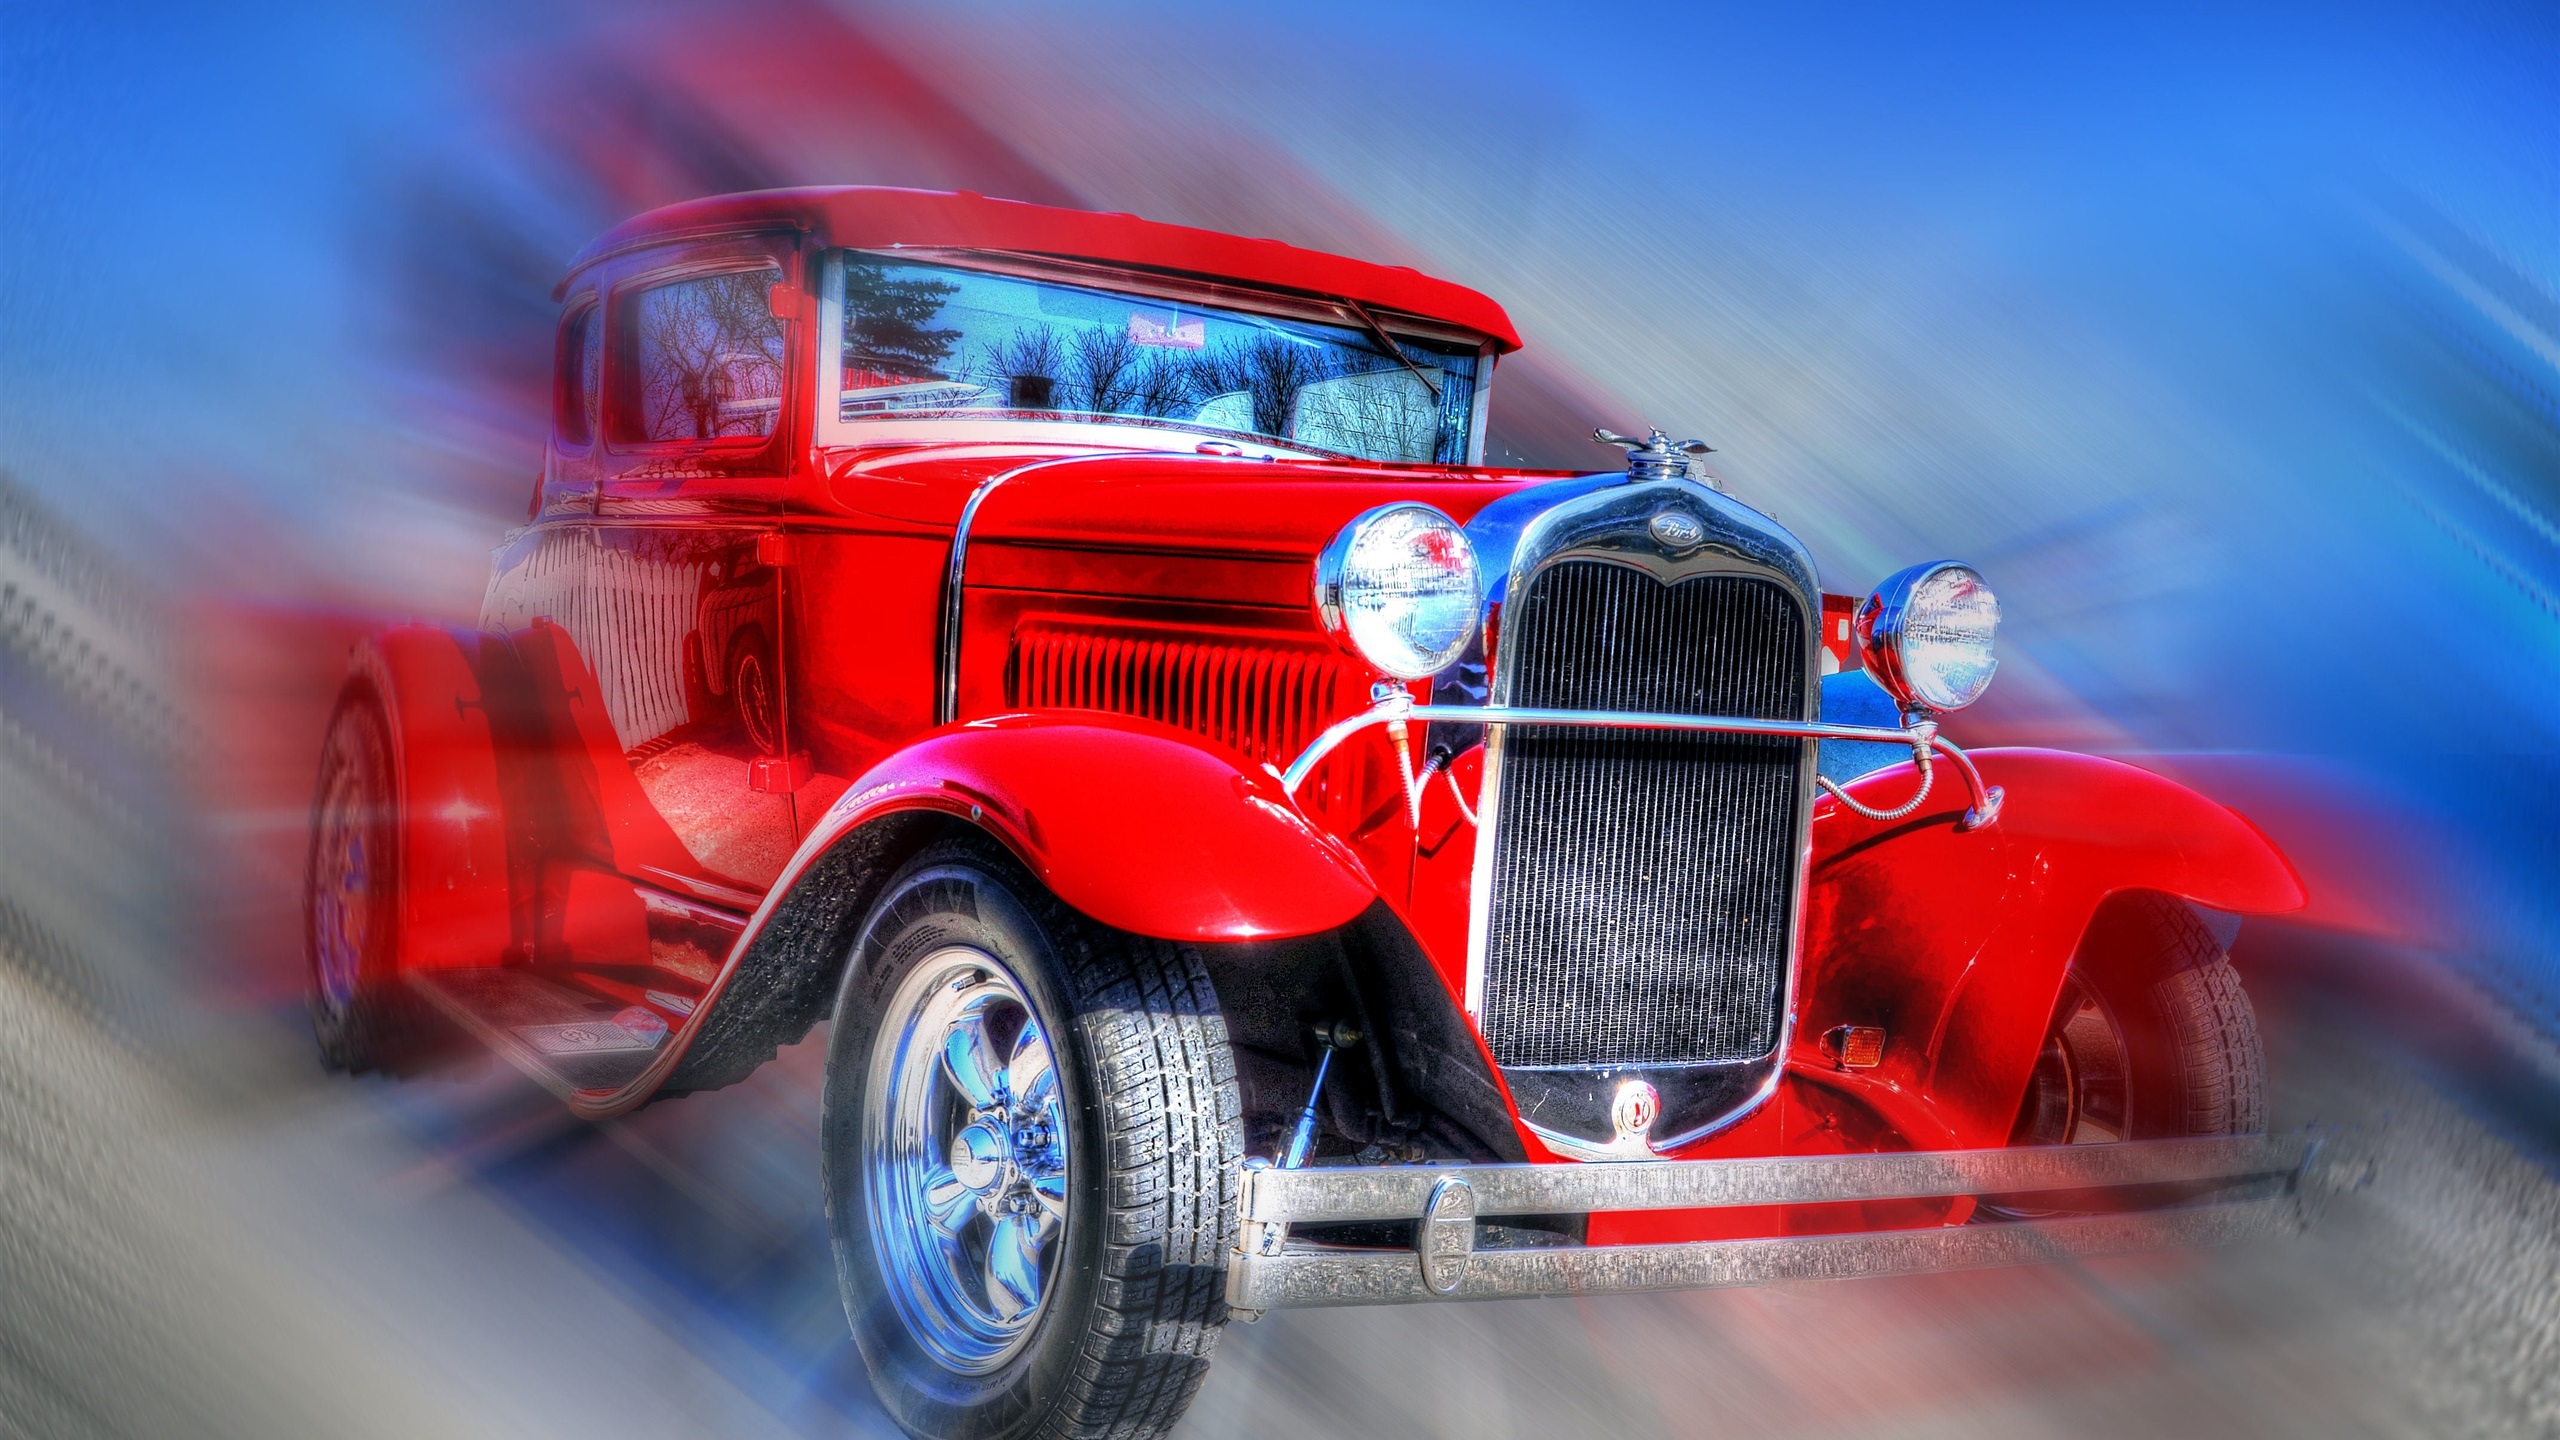 General 2560x1440 old car red car oldtimers vehicle red cars artwork